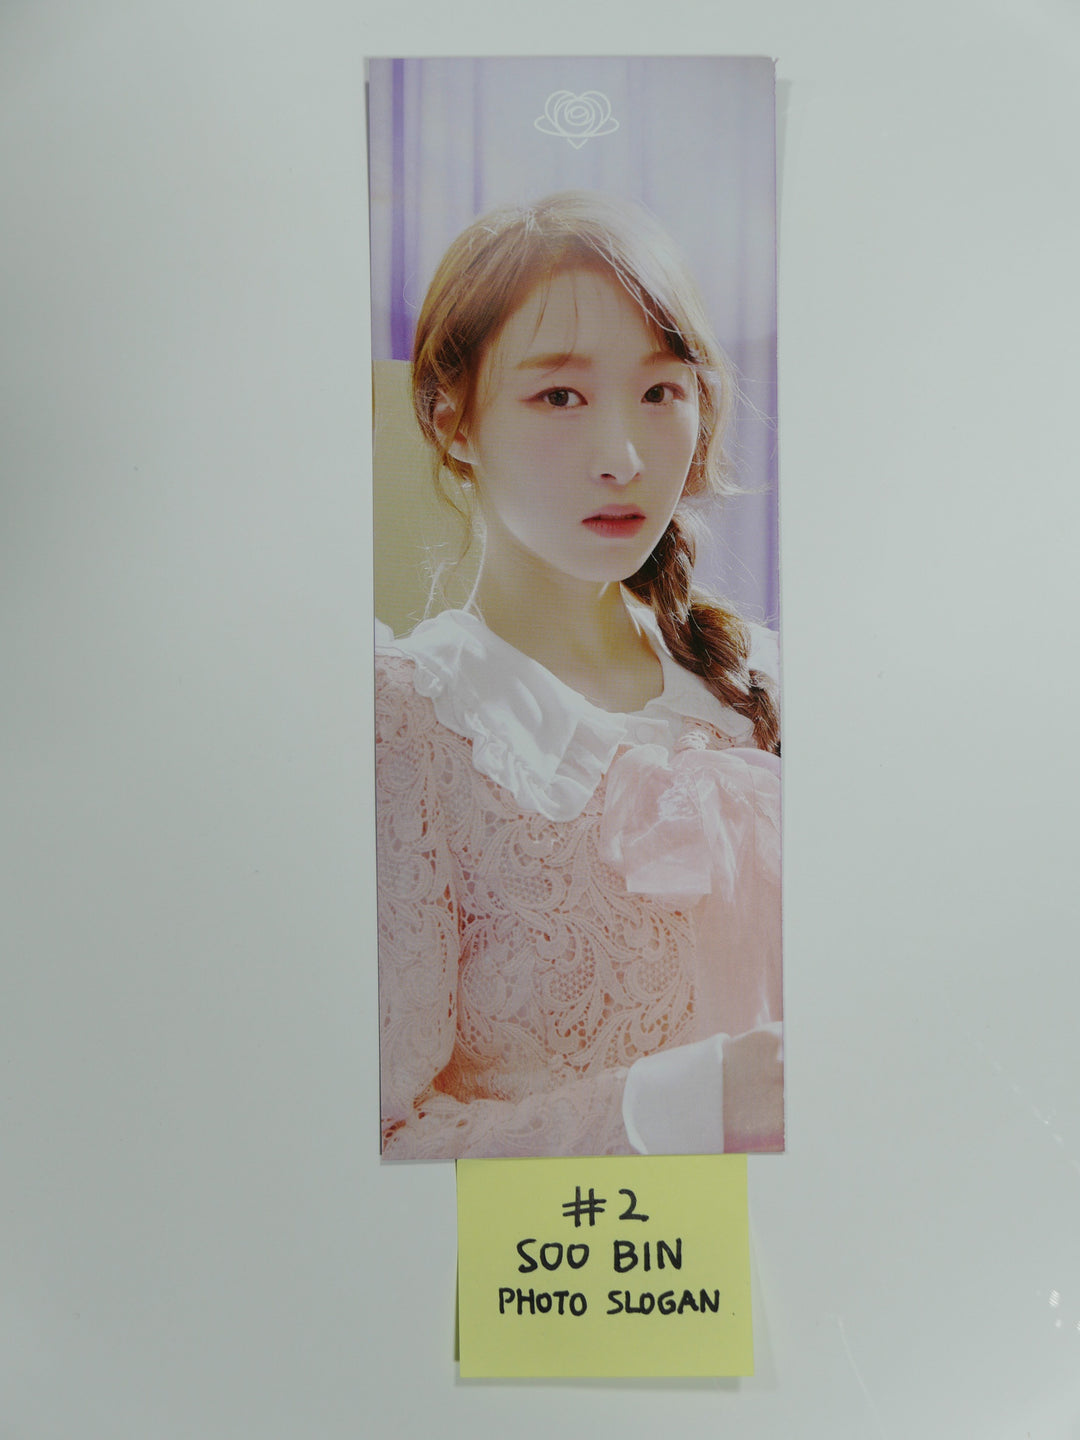 WJSN Cosmic Girls - "Unnatural" Official Photo Slogan, Film Photo, Photo Stand [updated 210408]